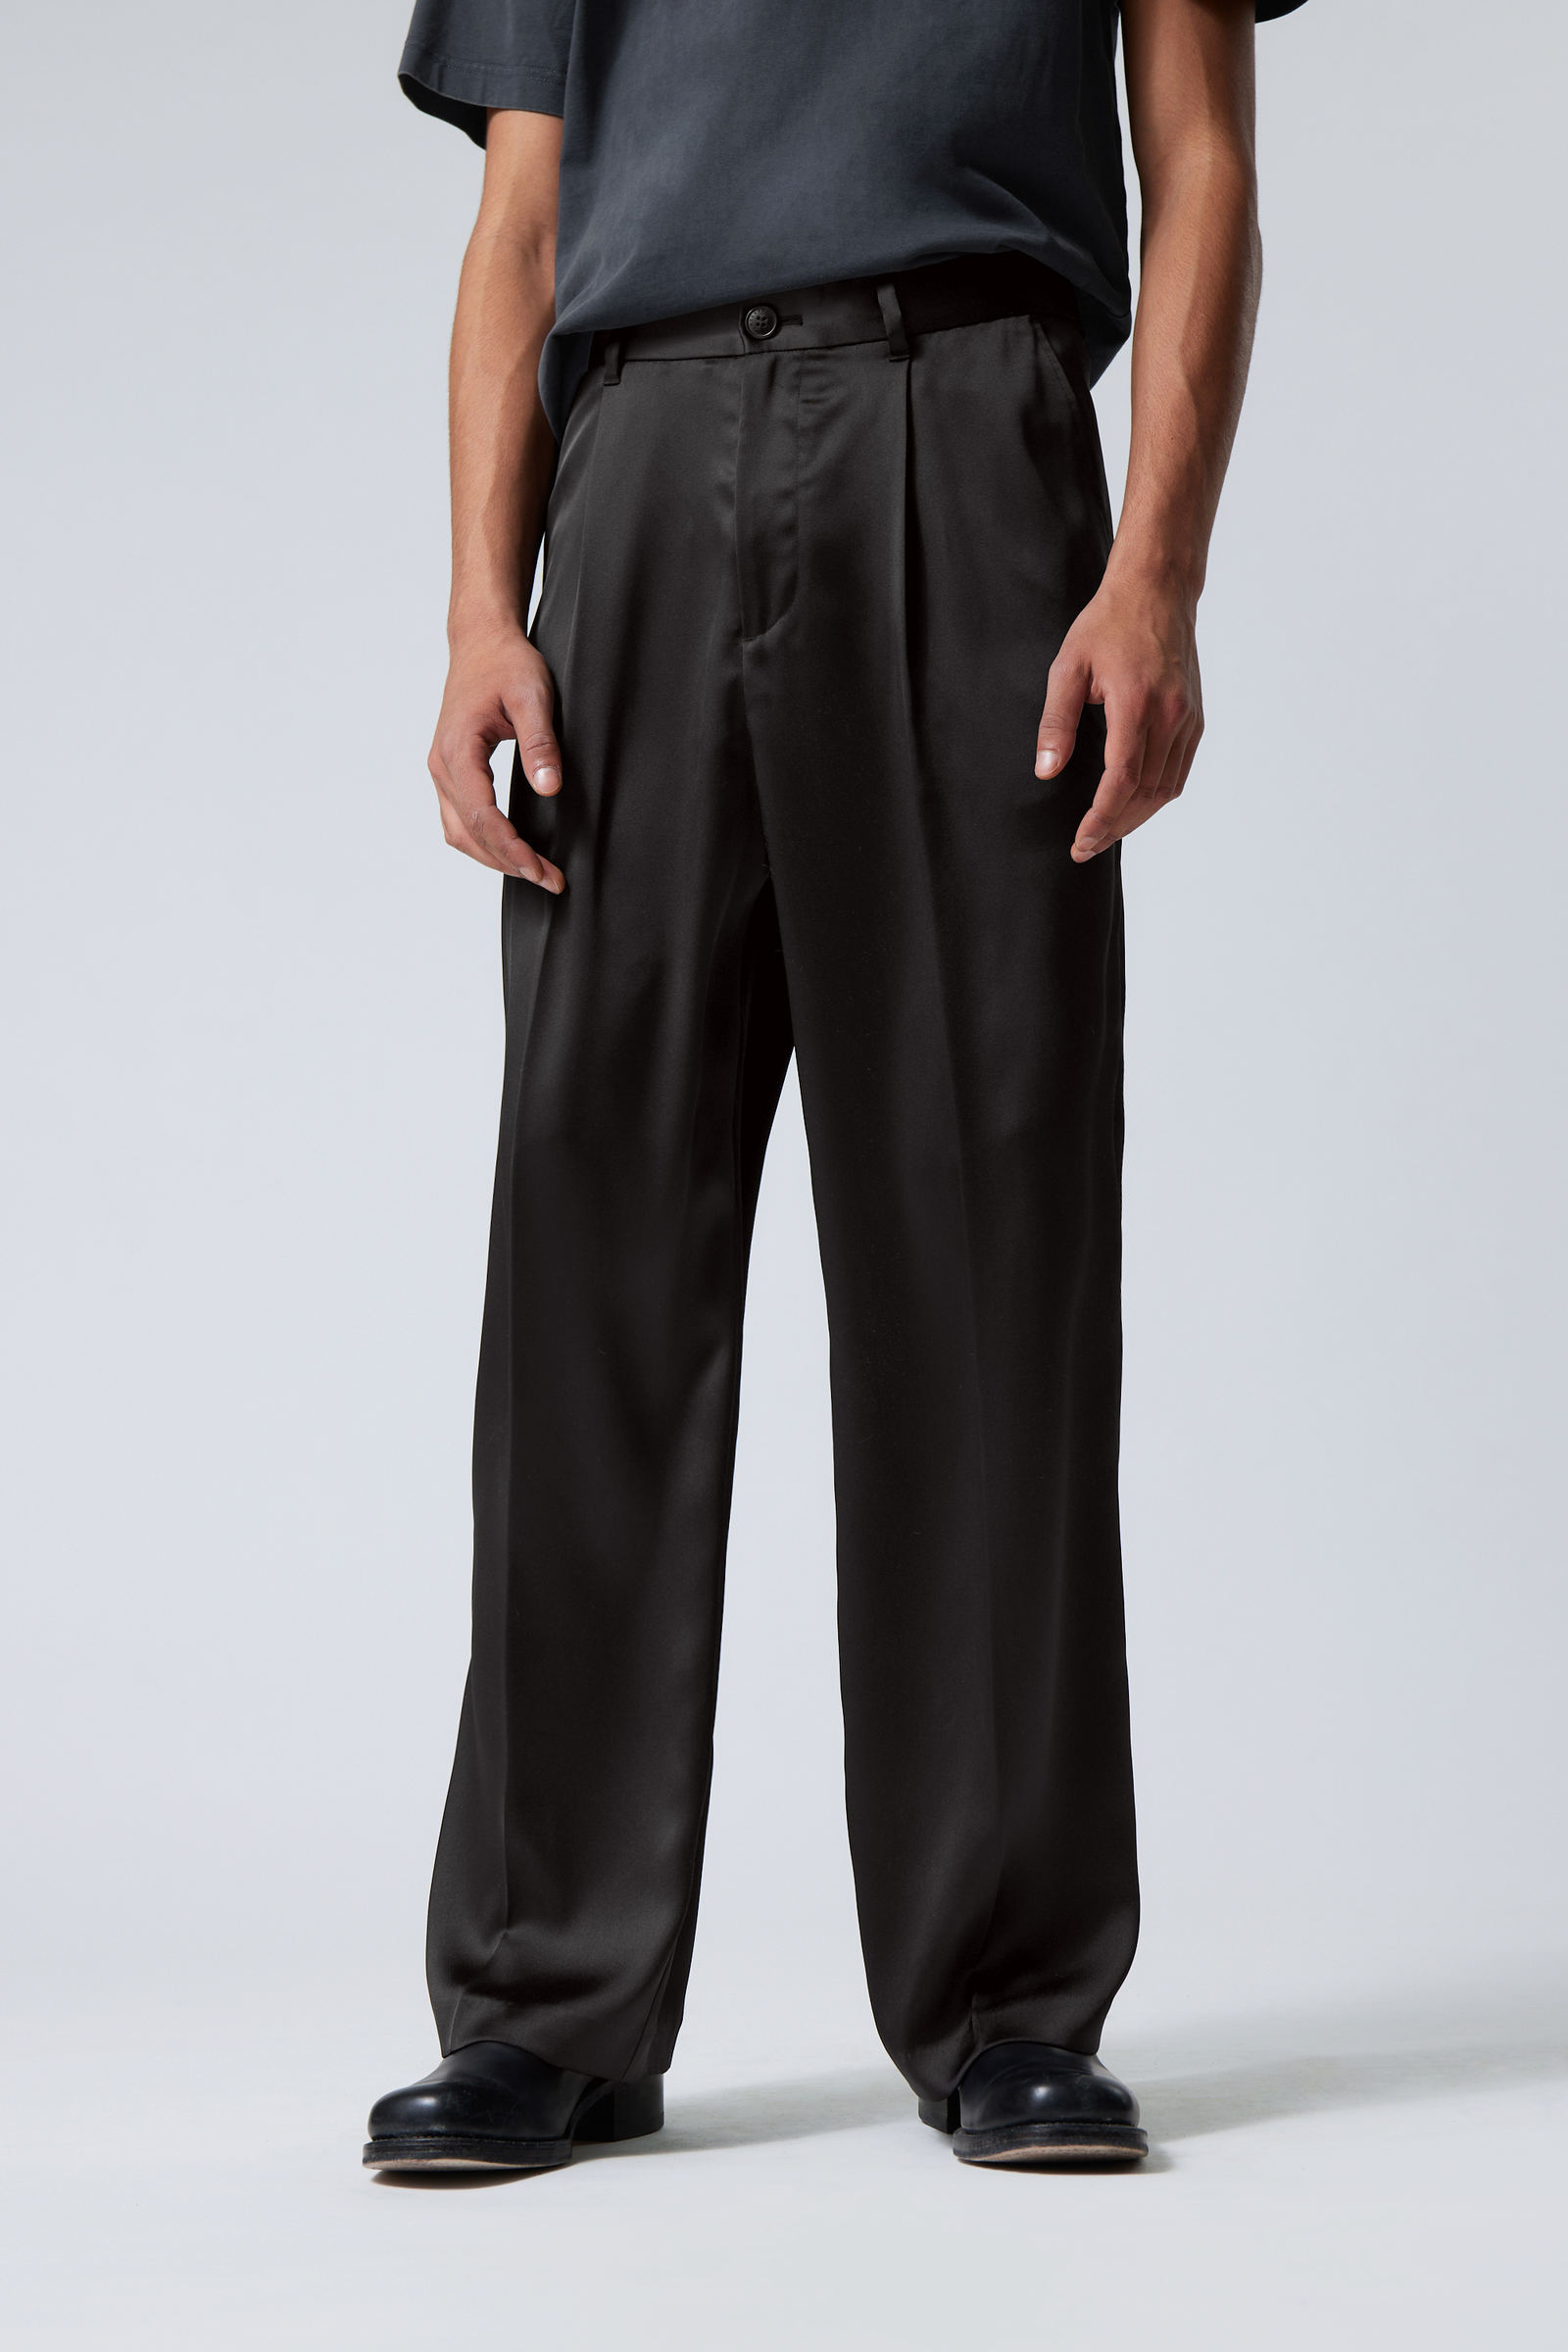 Black - Uno Loose Shiny Trousers - 4